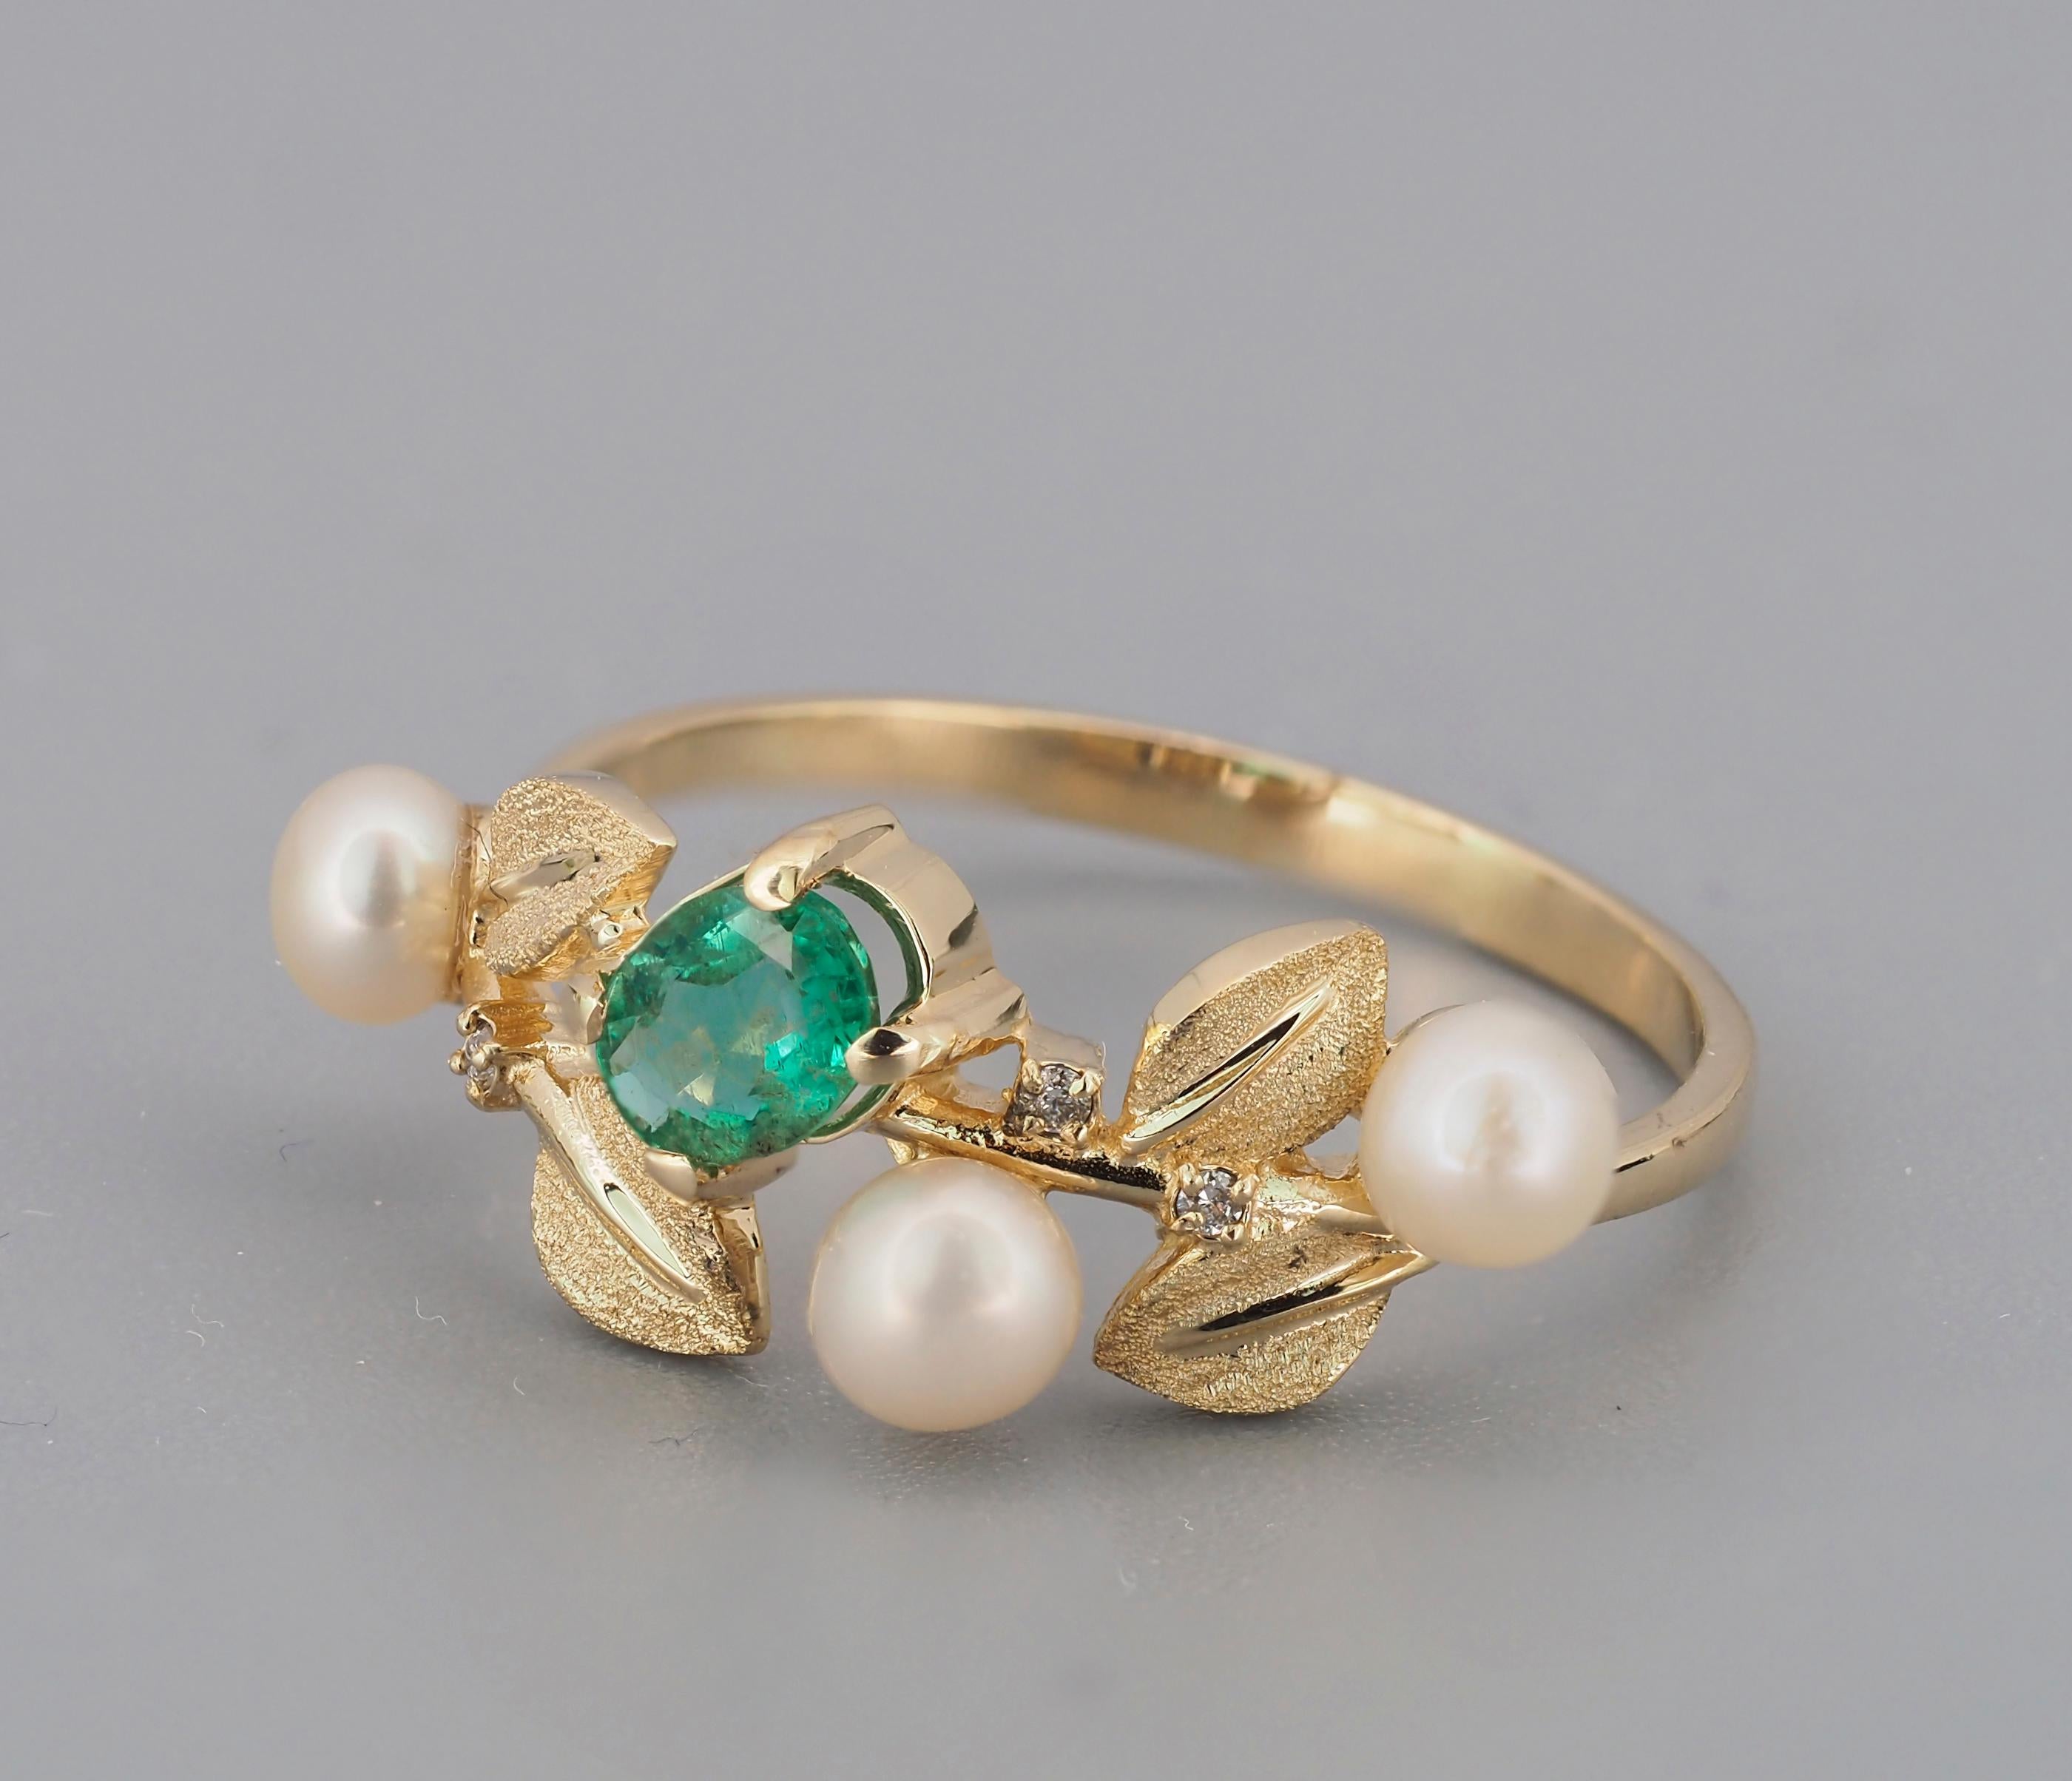 Oval Cut 14k Gold Ring with Emerald, Pearls and Diamonds